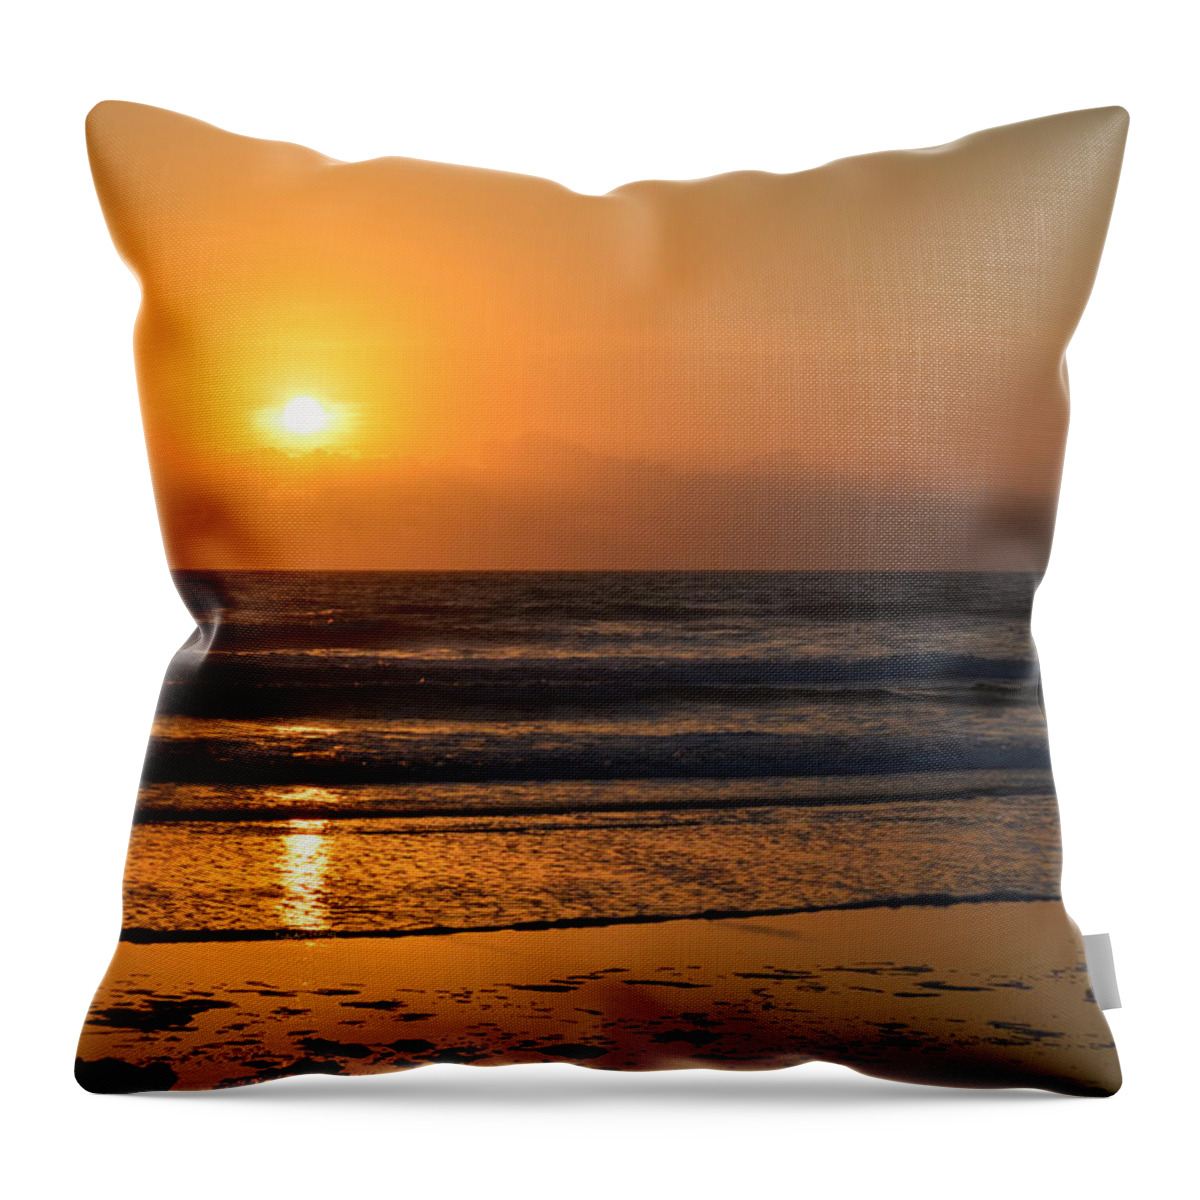 Sunrise Throw Pillow featuring the photograph Sundays Golden Sunrise by DigiArt Diaries by Vicky B Fuller